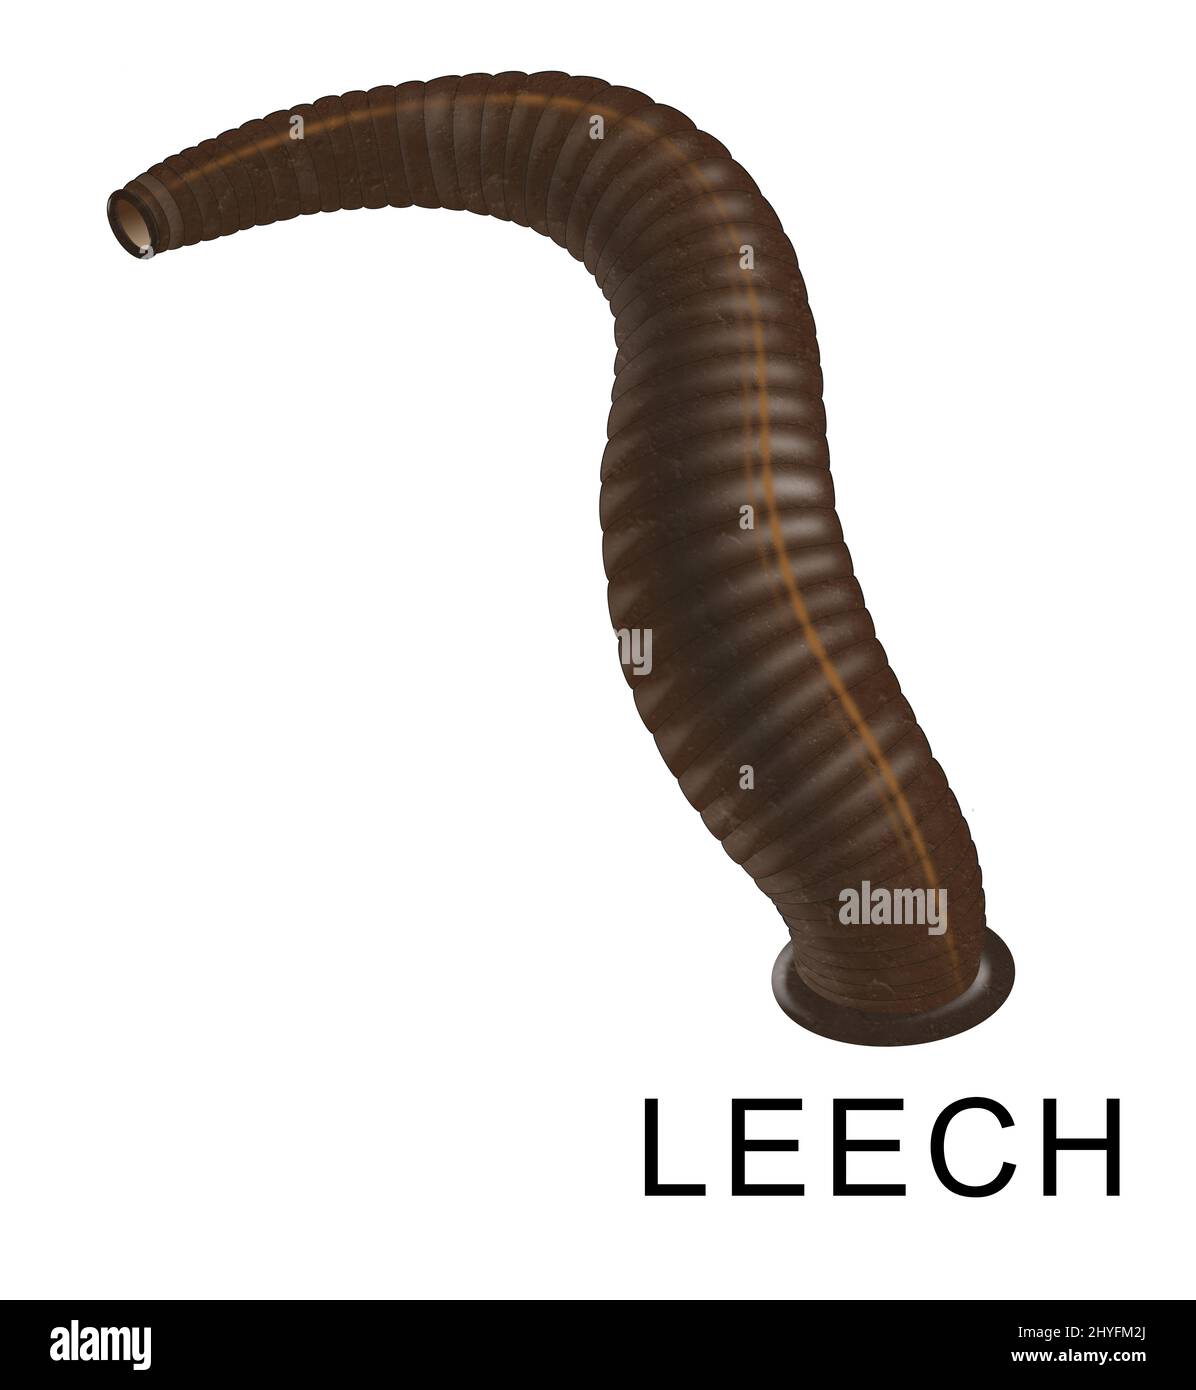 Leeches are segmented parasitic or predatory worms that comprise the subclass Hirudinea within the phylum Annelida Stock Photo